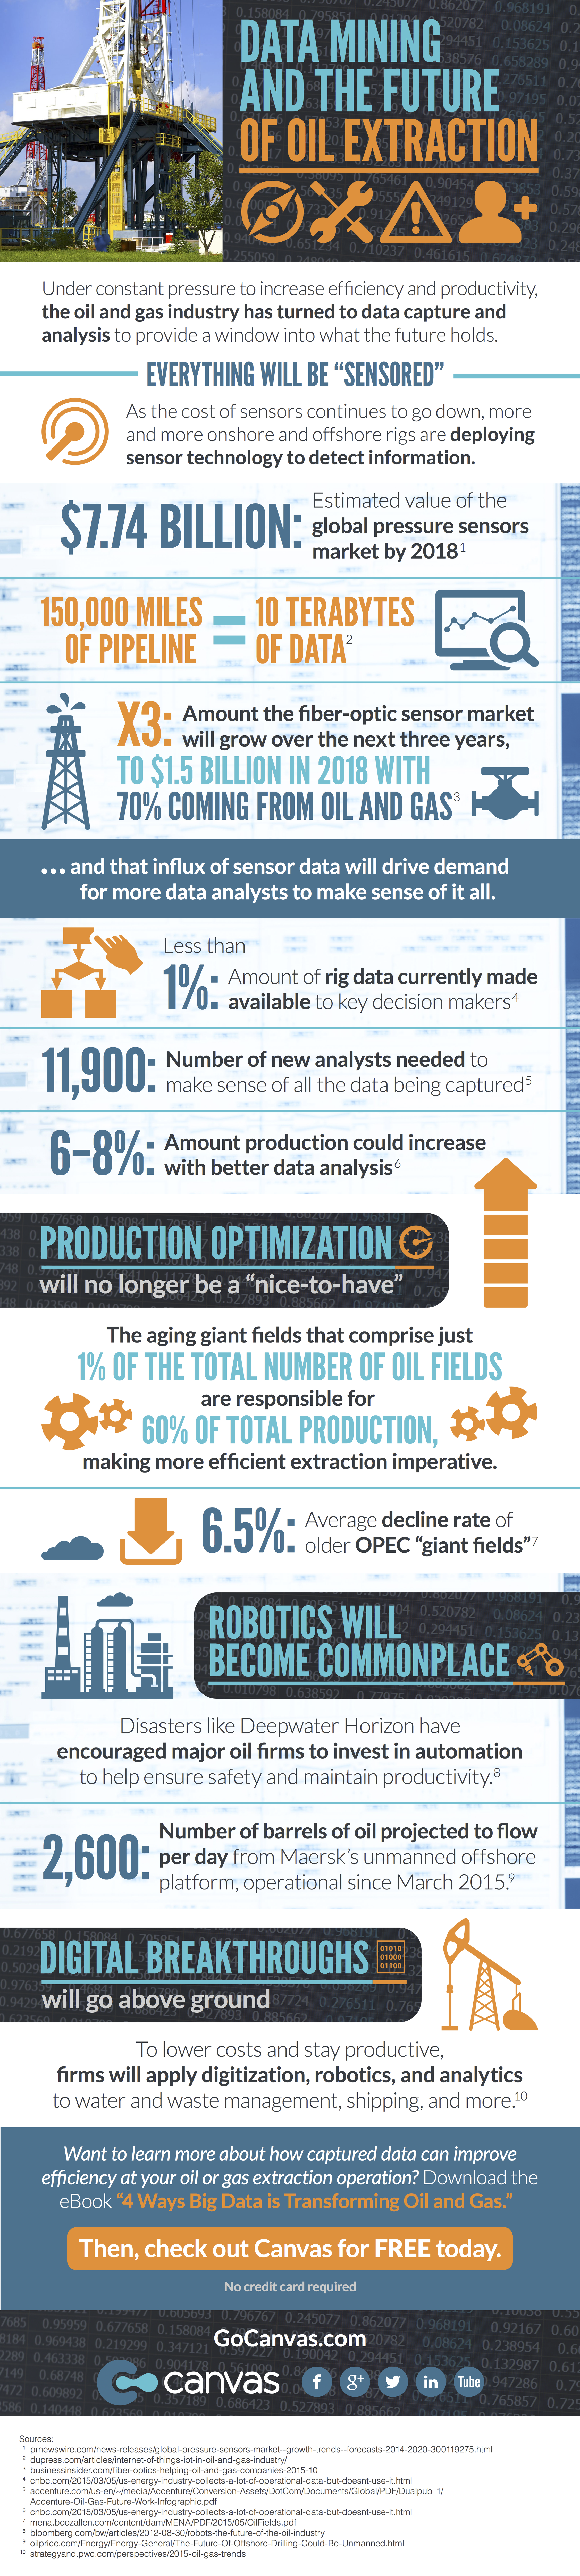 Data Mining and the Future of Oil Extraction